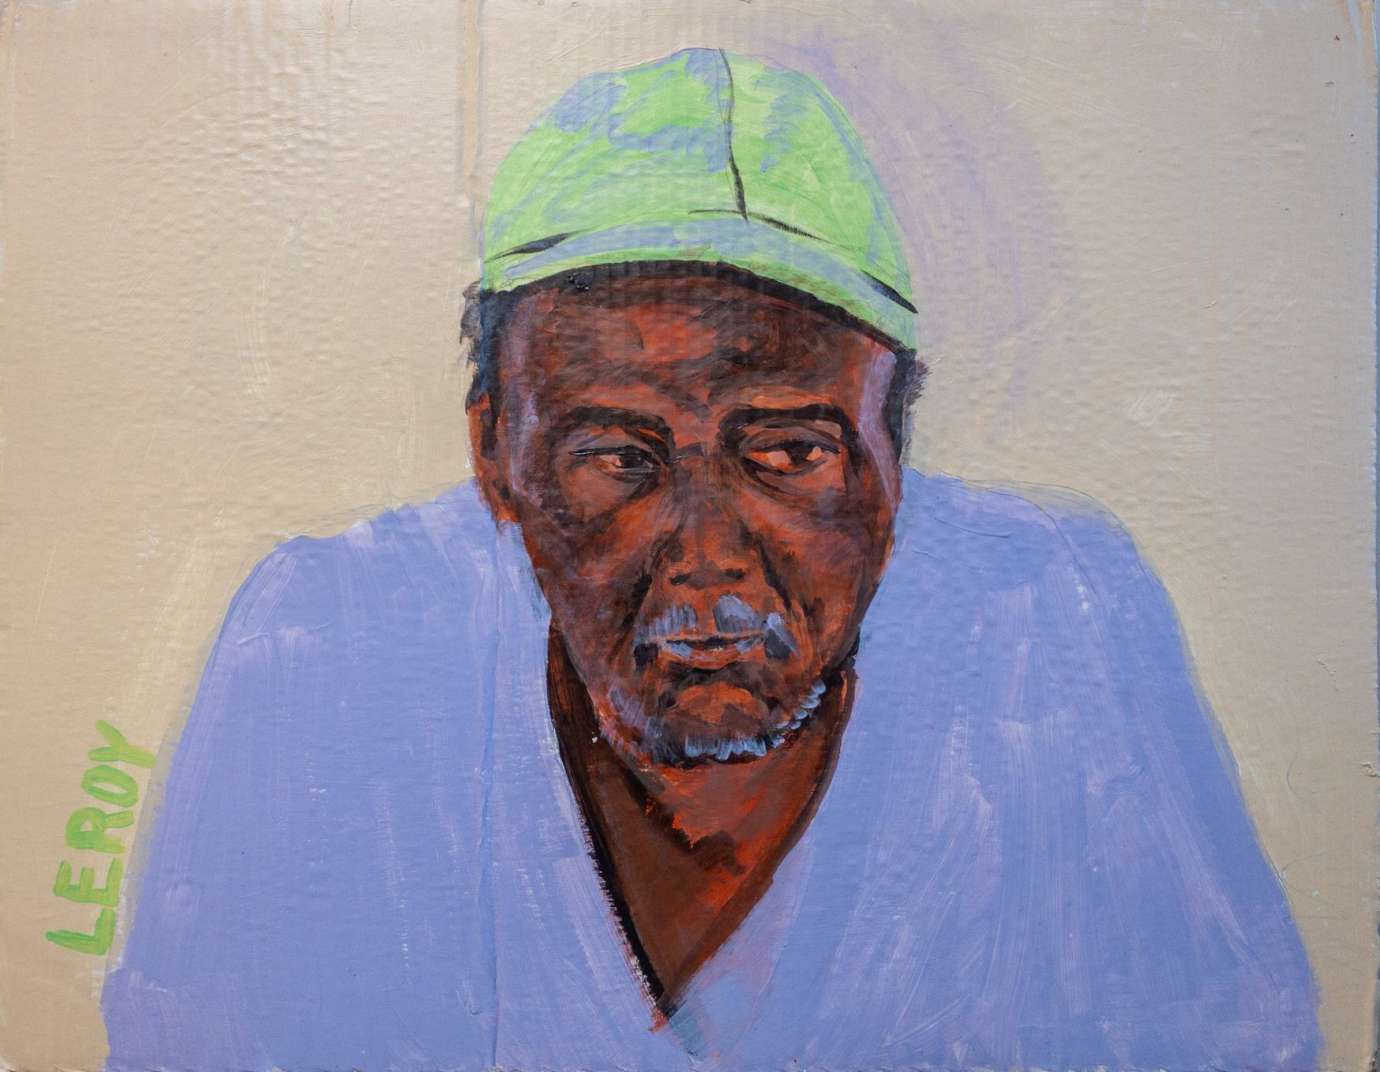 A Black man with wrinkles wearing a yellow hat and white shirt